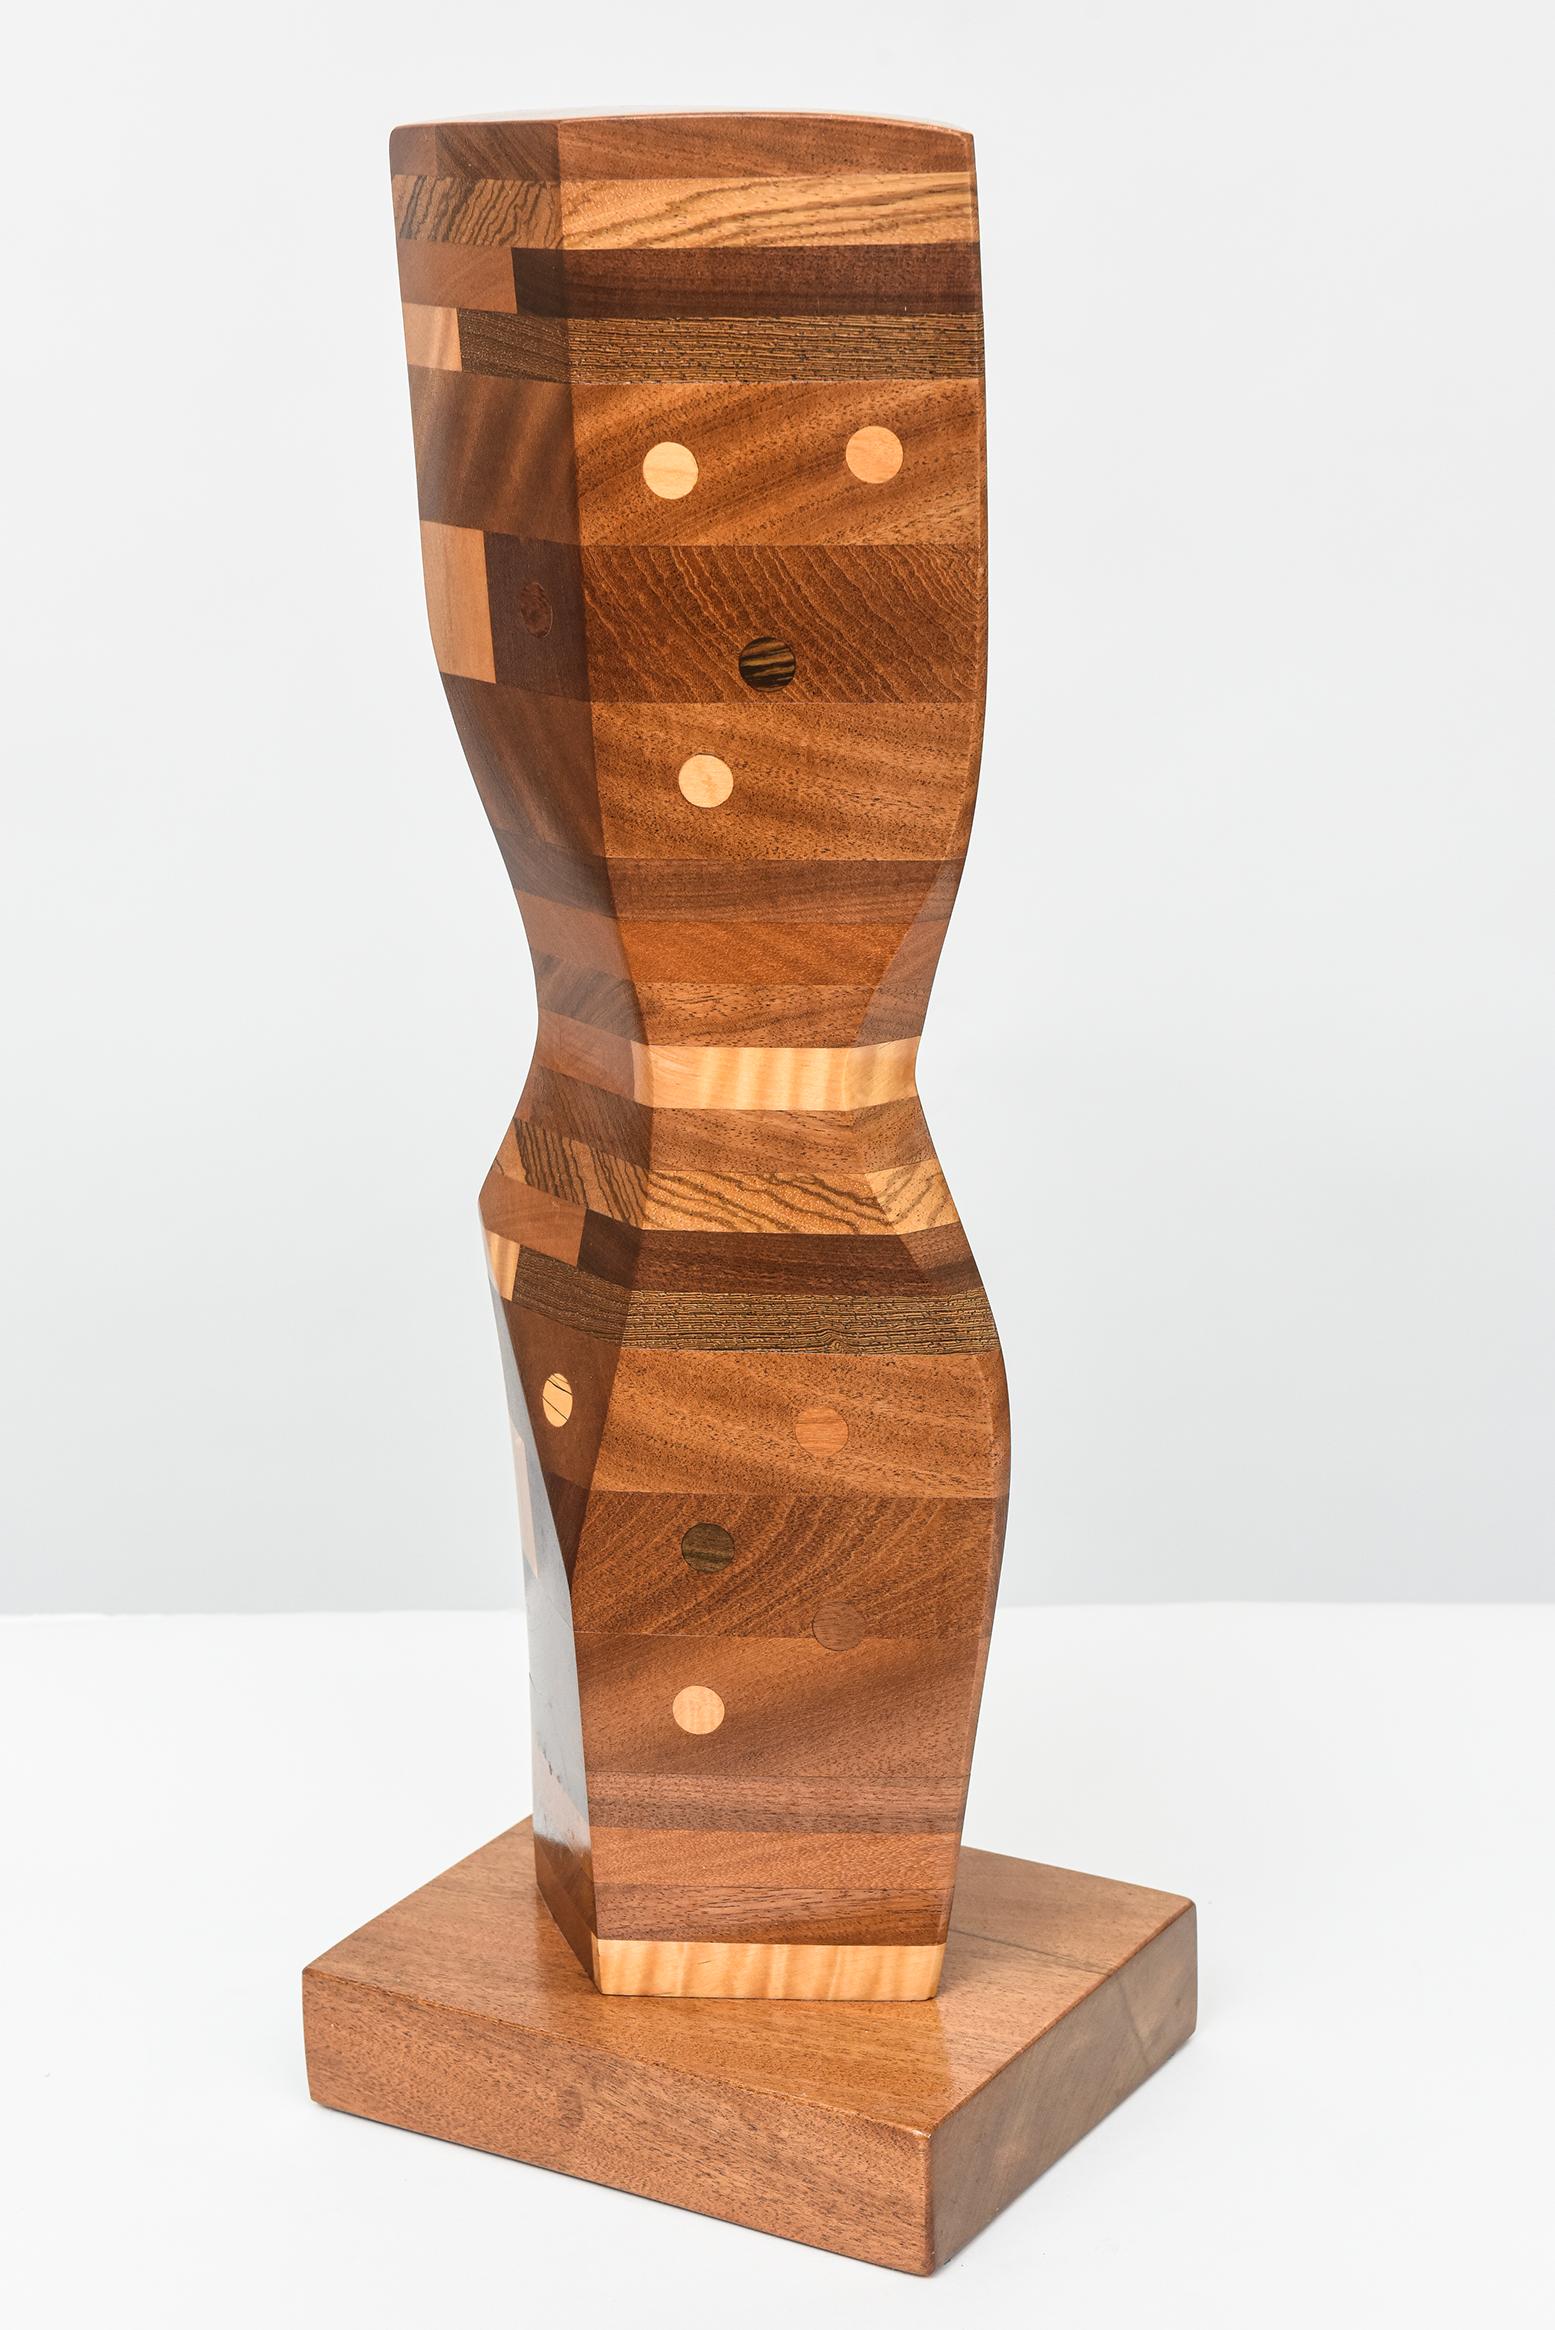 Two Modern Abstract Mixed Wood Studio Sculptures by Paul LaMontagne, C. 1980 In Good Condition For Sale In North Miami, FL